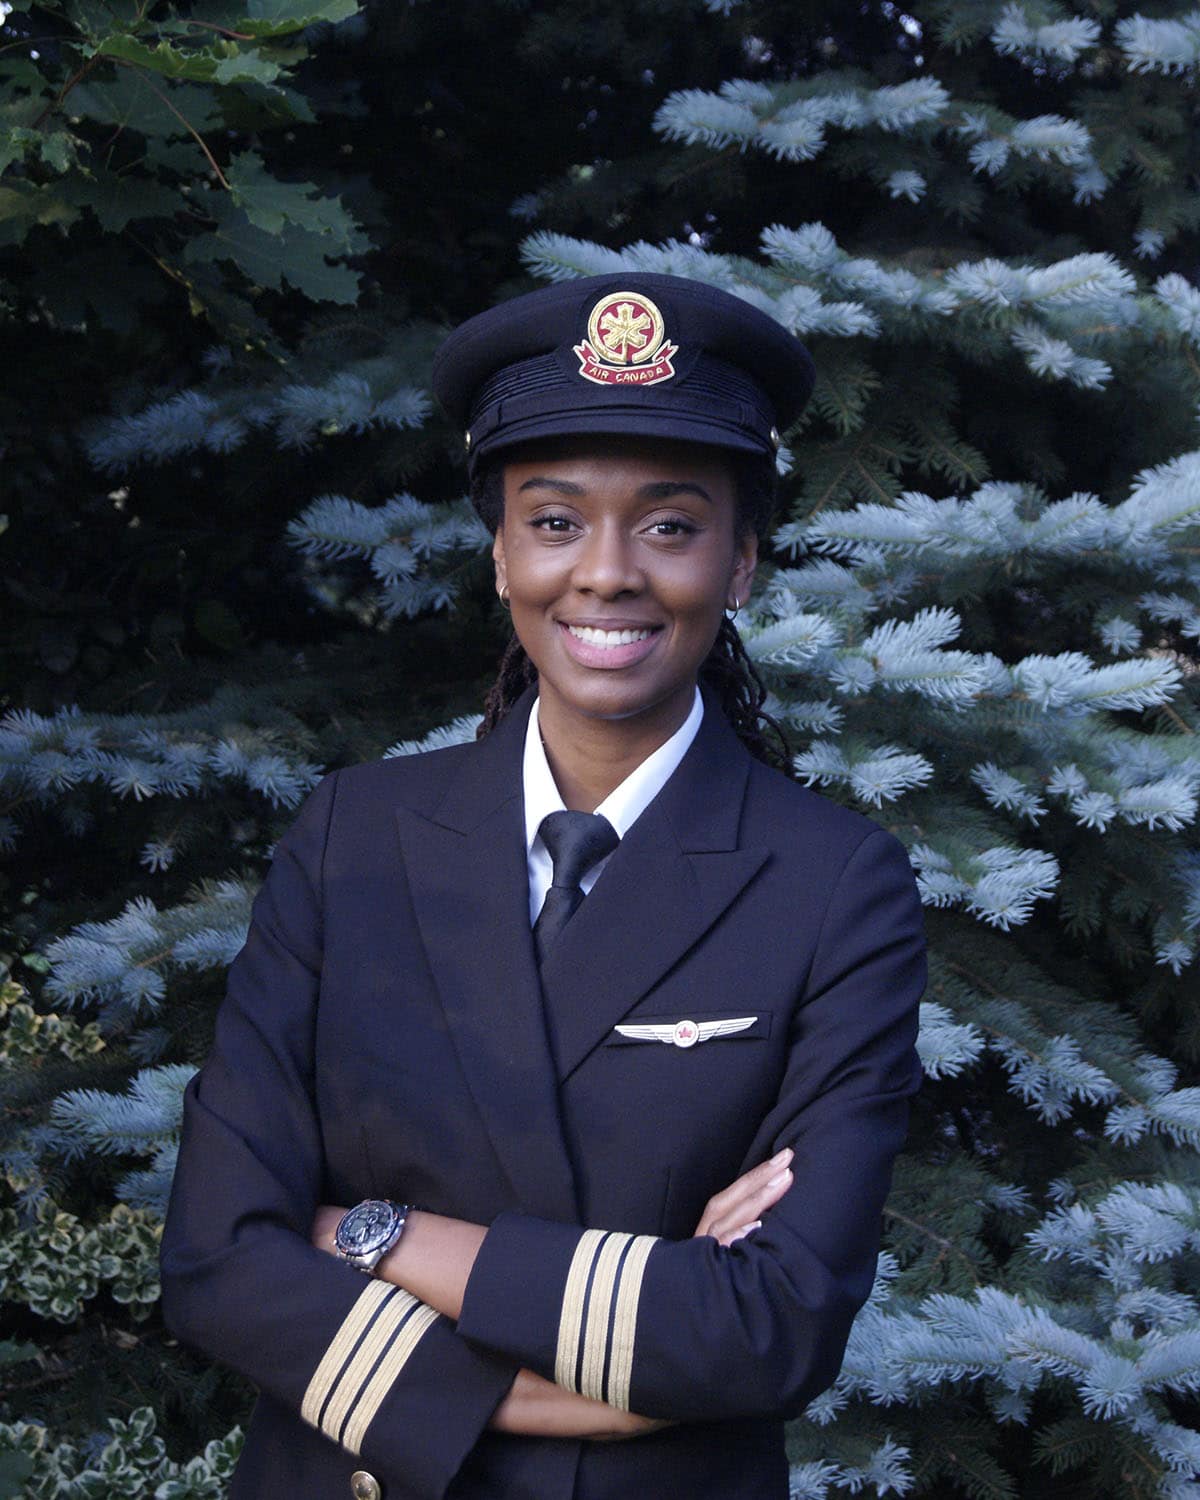 As the first Black female pilot at Air Canada, Zoey Williams proudly wears the uniform of a first officer at the airline. (Photo: Isel Williams)